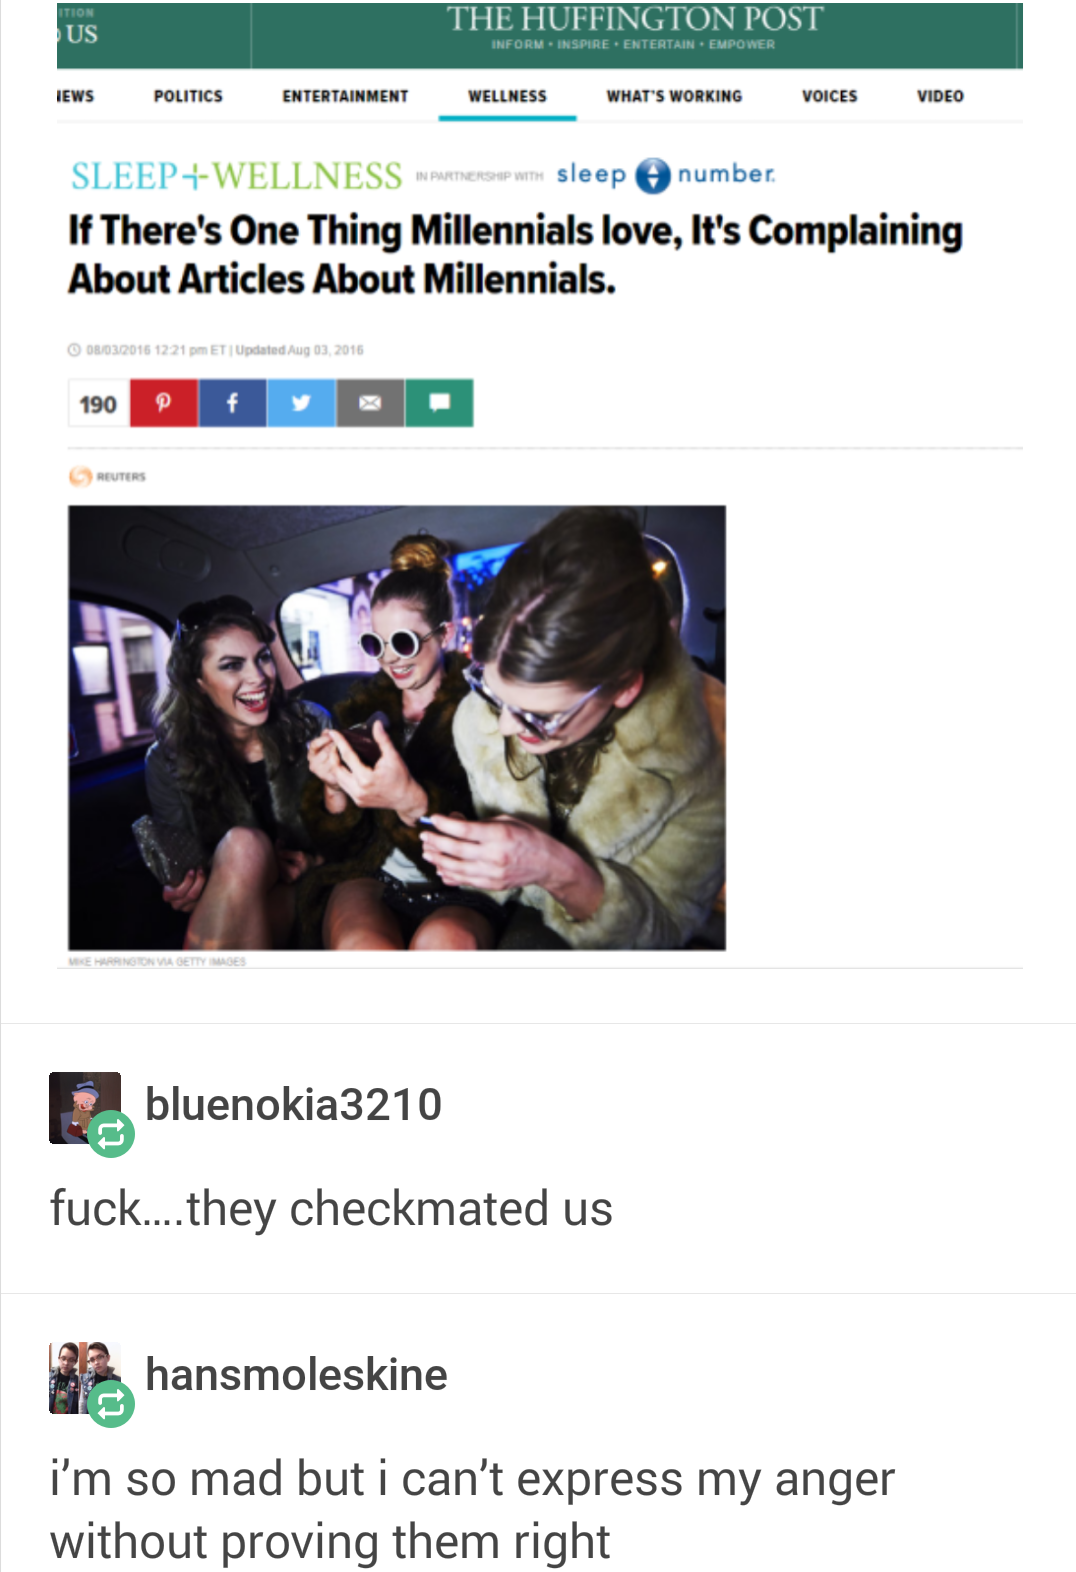 most millennial memes - The Huffington Post SleepWellness sleep number If there's One Thing Millennials love, It's Complaining About Articles About Millennials. bluenokia3210 fuck....they checkmated us hansmoleskine i'm so mad but i can't express my anger